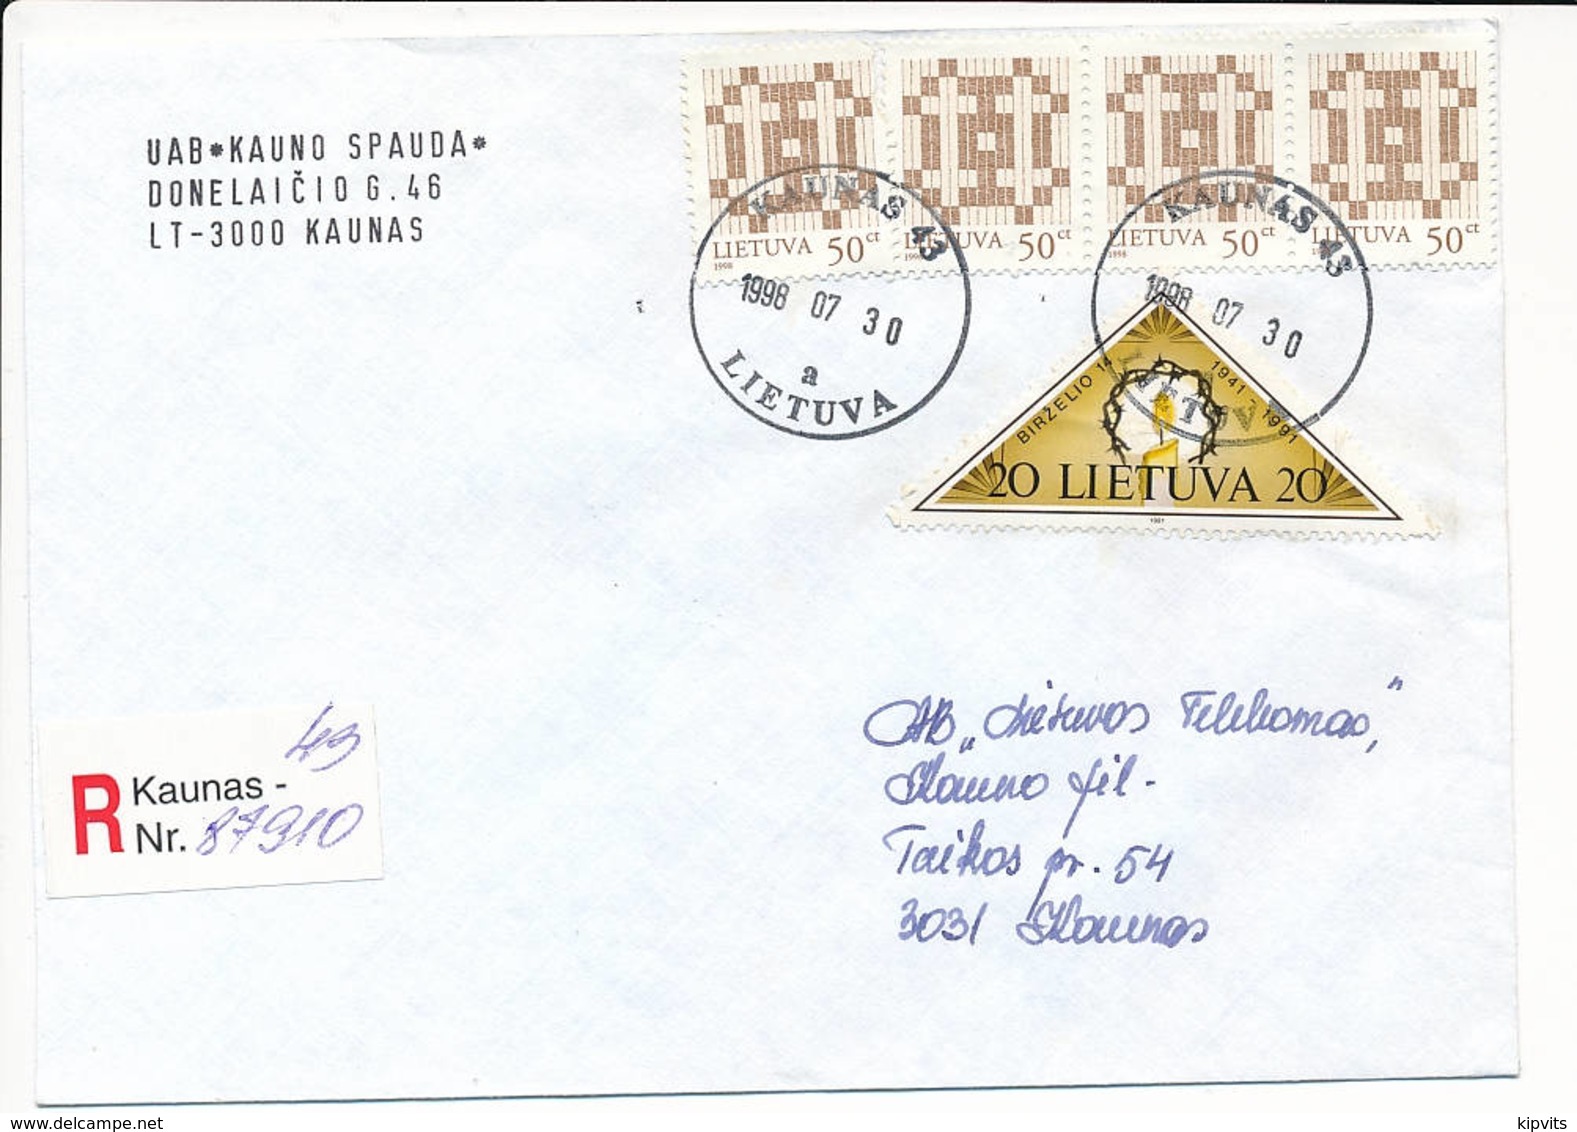 Registered Commercial Cover / Triangular Stamp - 30 July 1998 Kaunas 43 - Lithuania